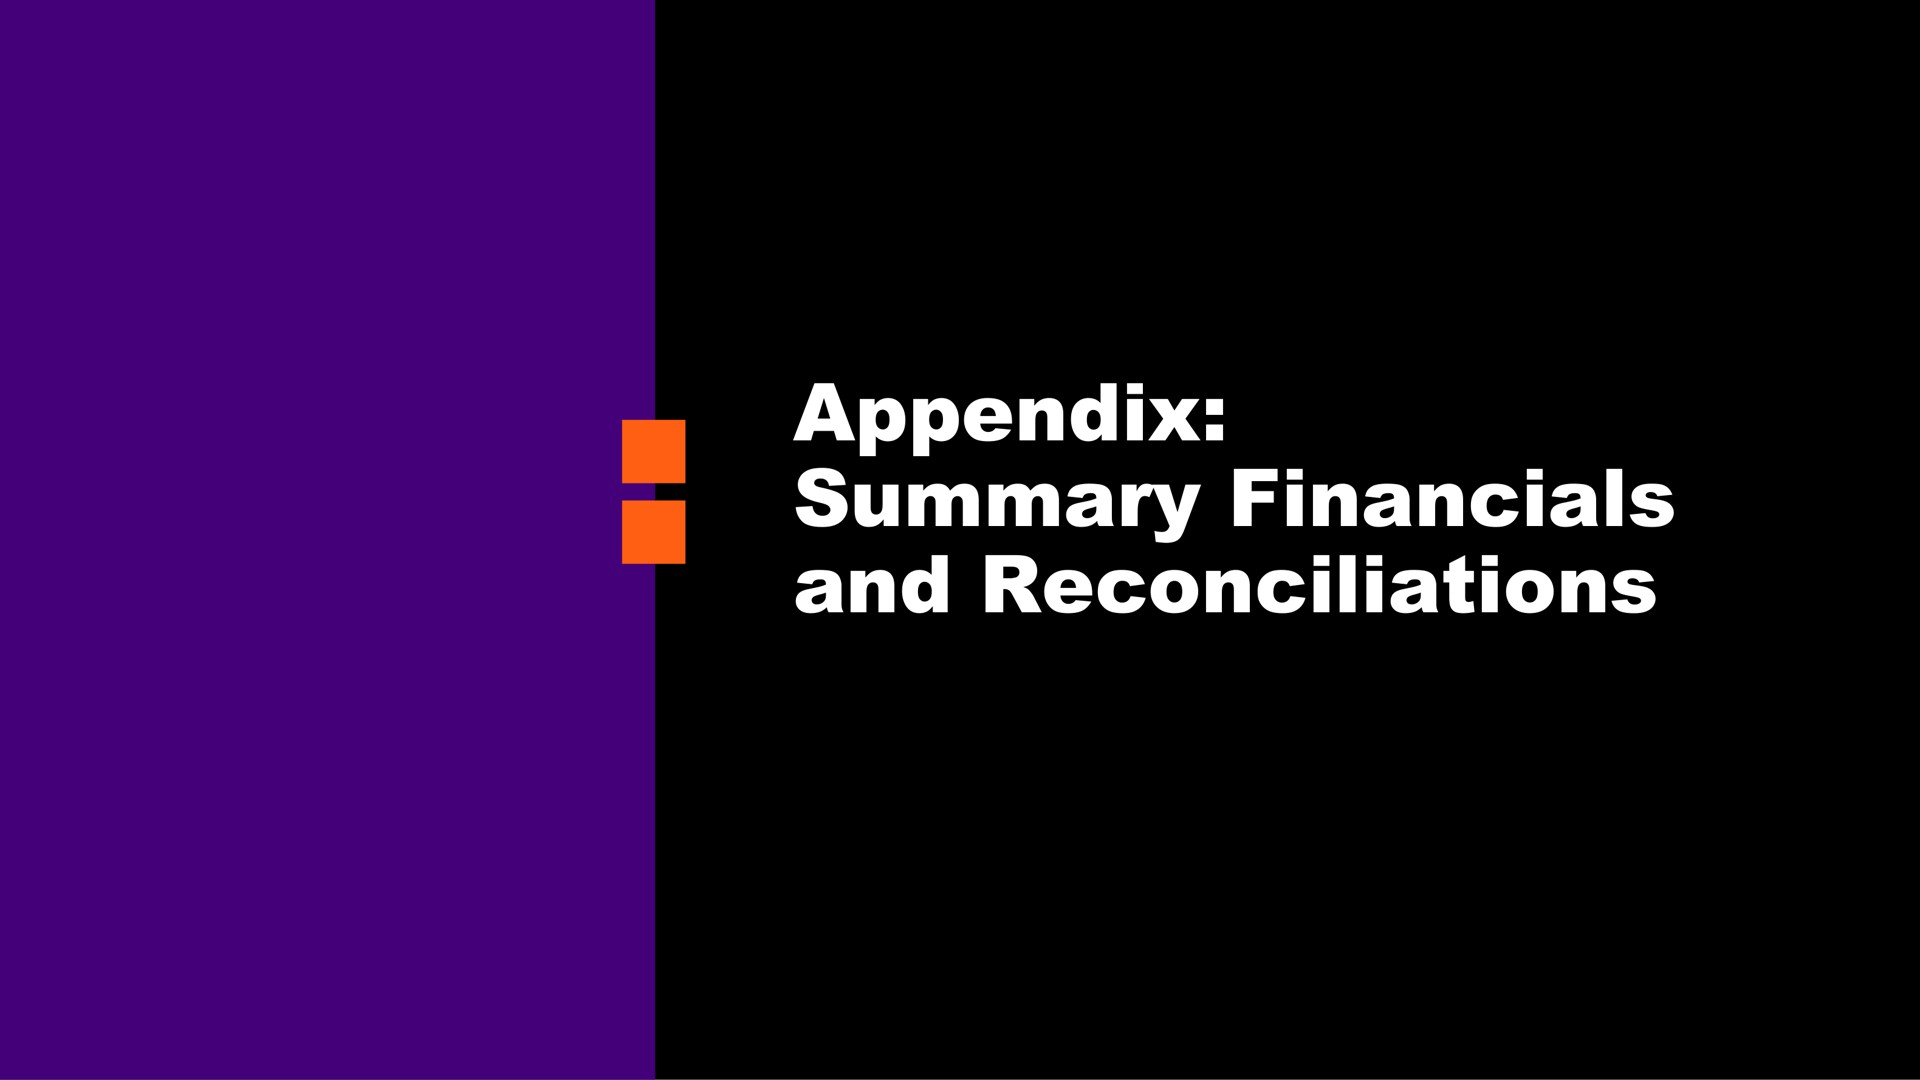 appendix summary and reconciliations | GlobalFoundries